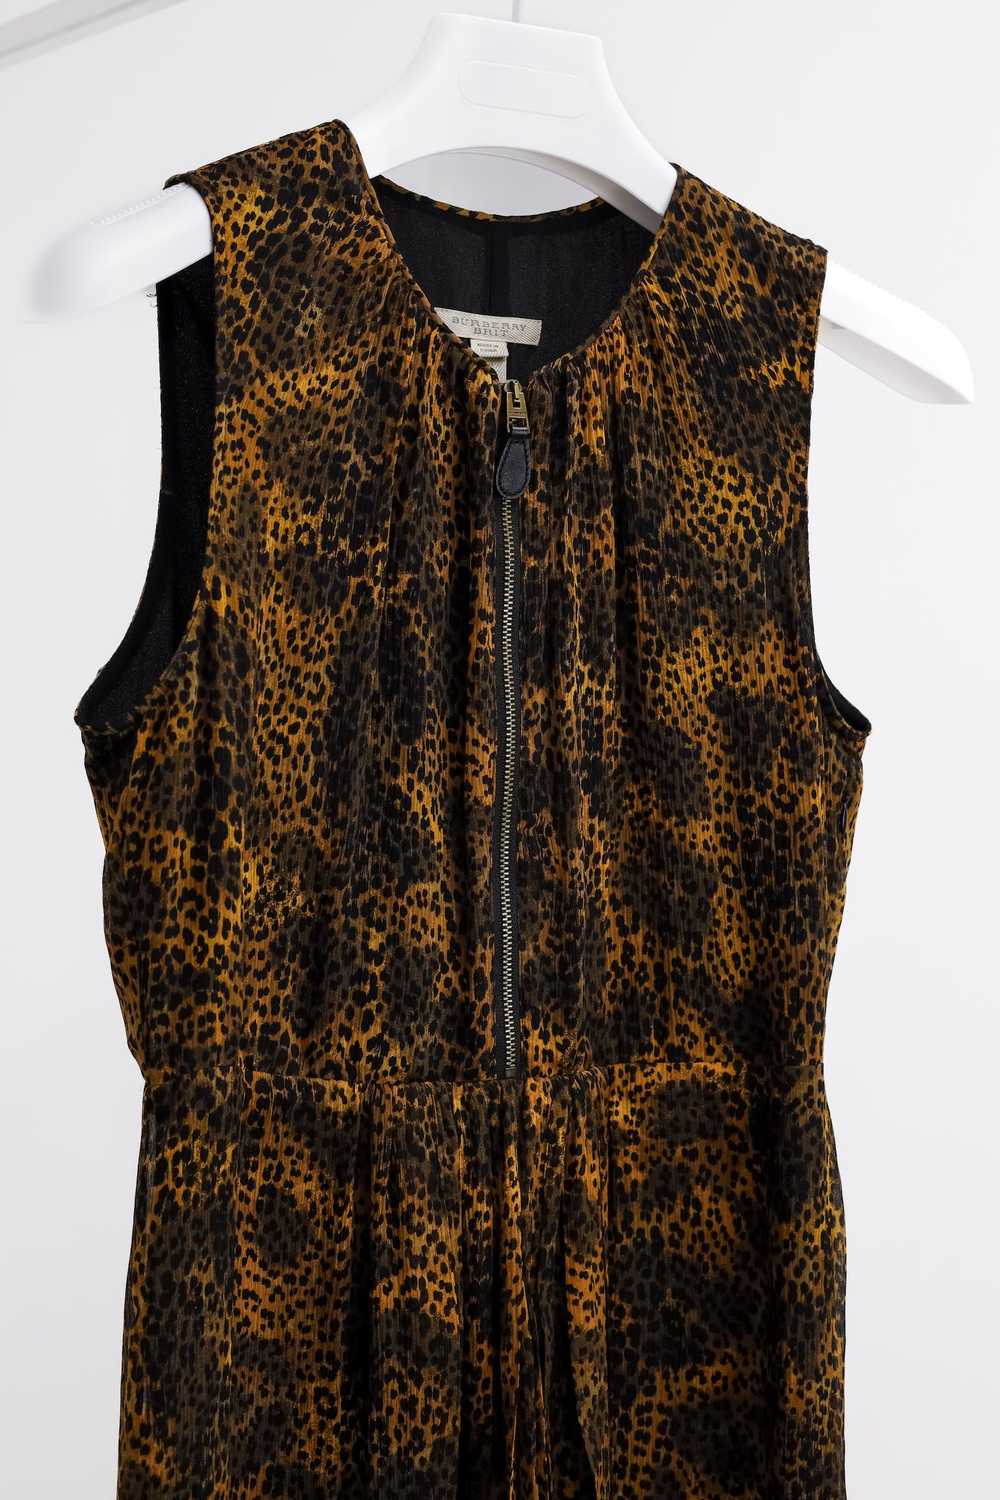 Burberry Burberry Brit Silk Cheetah Print Fit and… - image 3